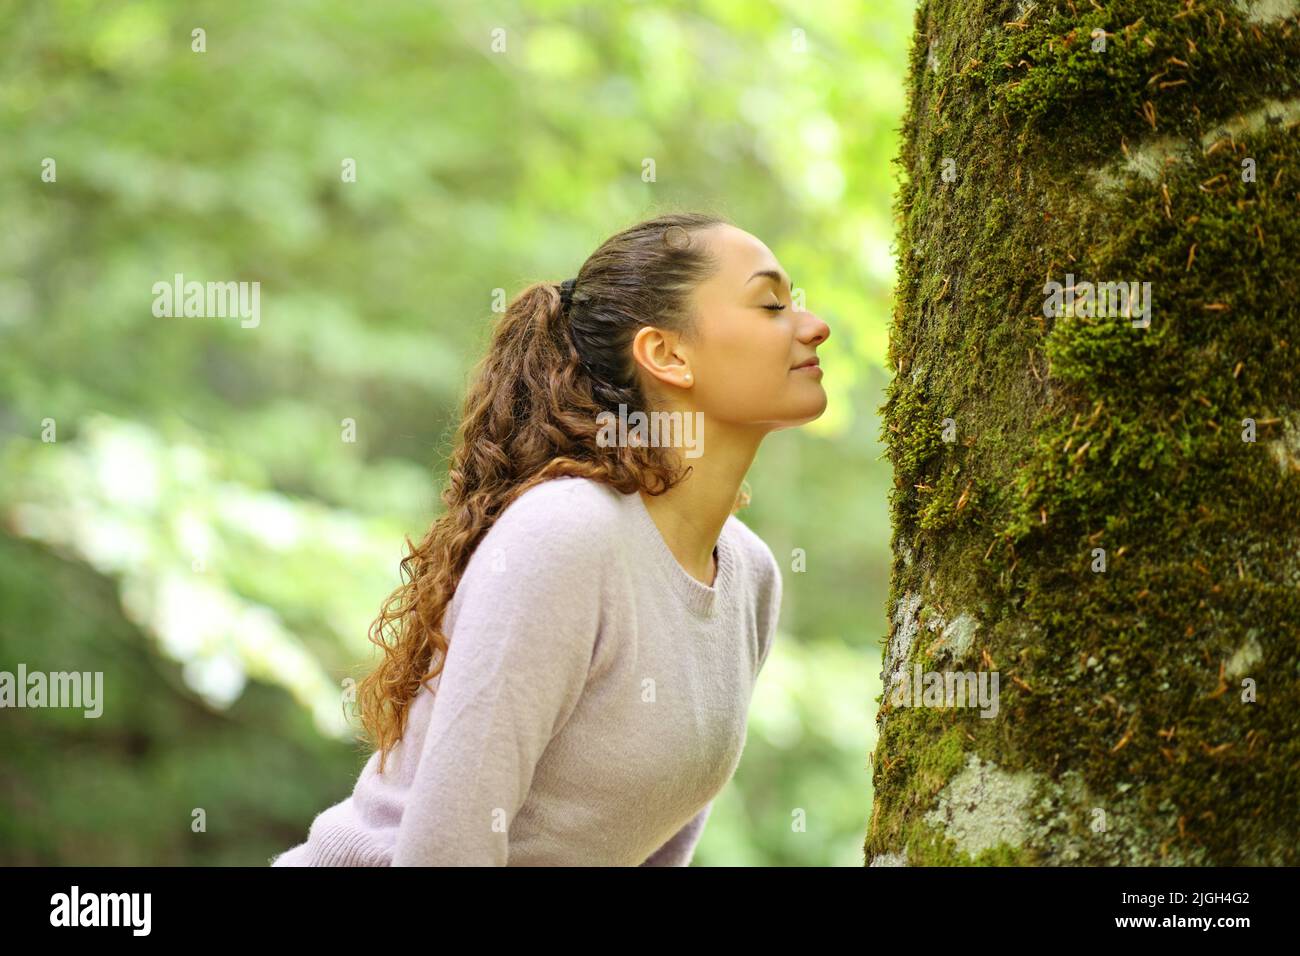 Profile of a happy woman smelling moss in a tree in a forest Stock Photo